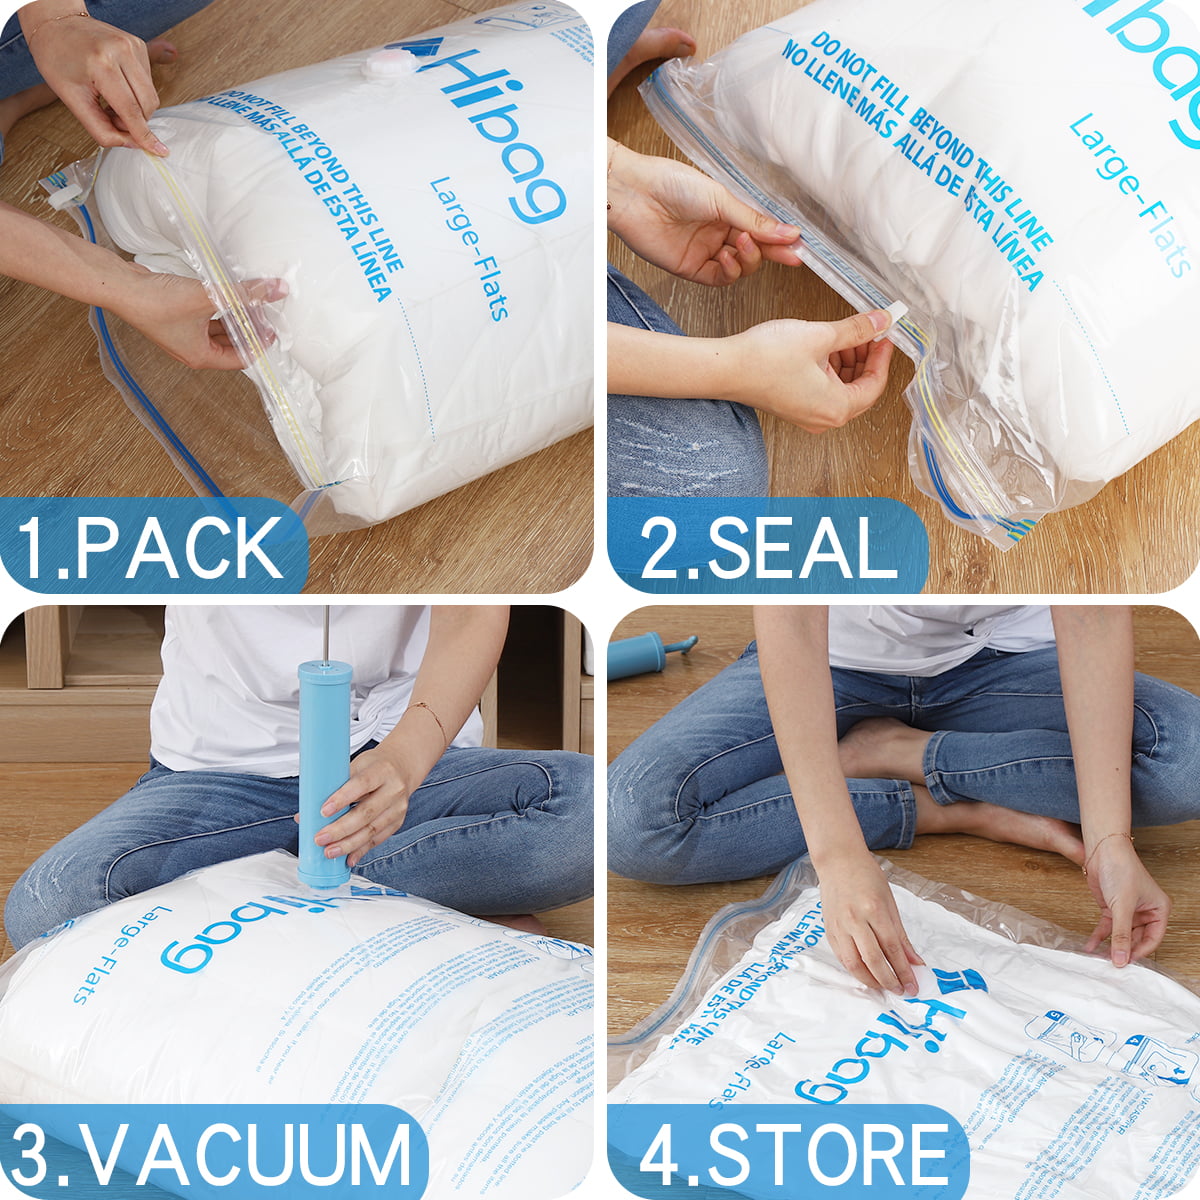 HIBAG 20 Pack Vacuum Storage Bags with Hand Pump (4 Medium, 3 Large, 3  Jumbo, 4 Small, 3 Carry-on Travel Bags, 3 Pouch Travel Bags) 